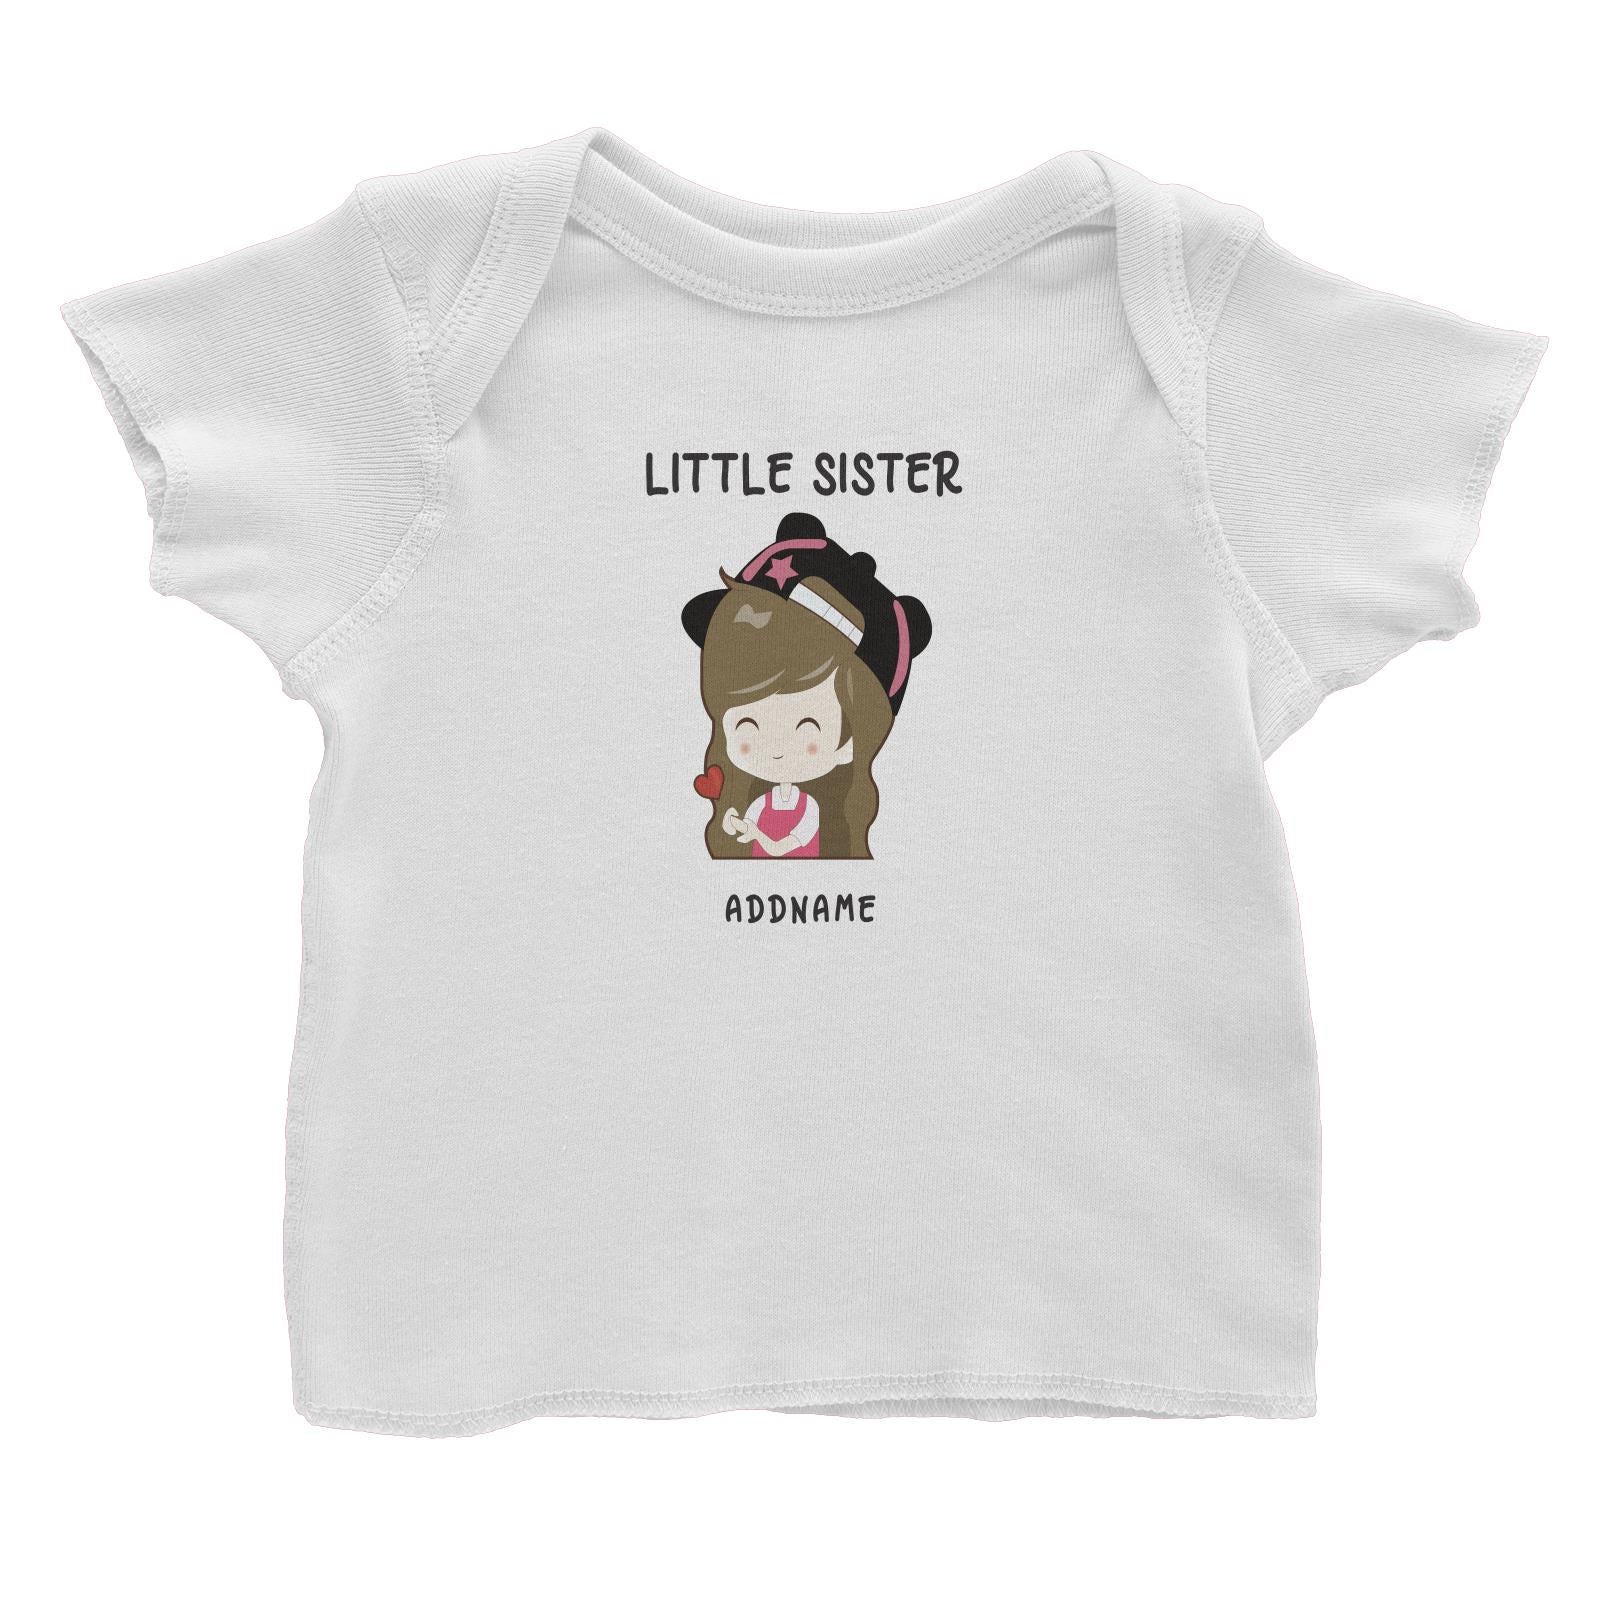 My Lovely Family Series Little Sister Addname Baby T-Shirt (FLASH DEAL)